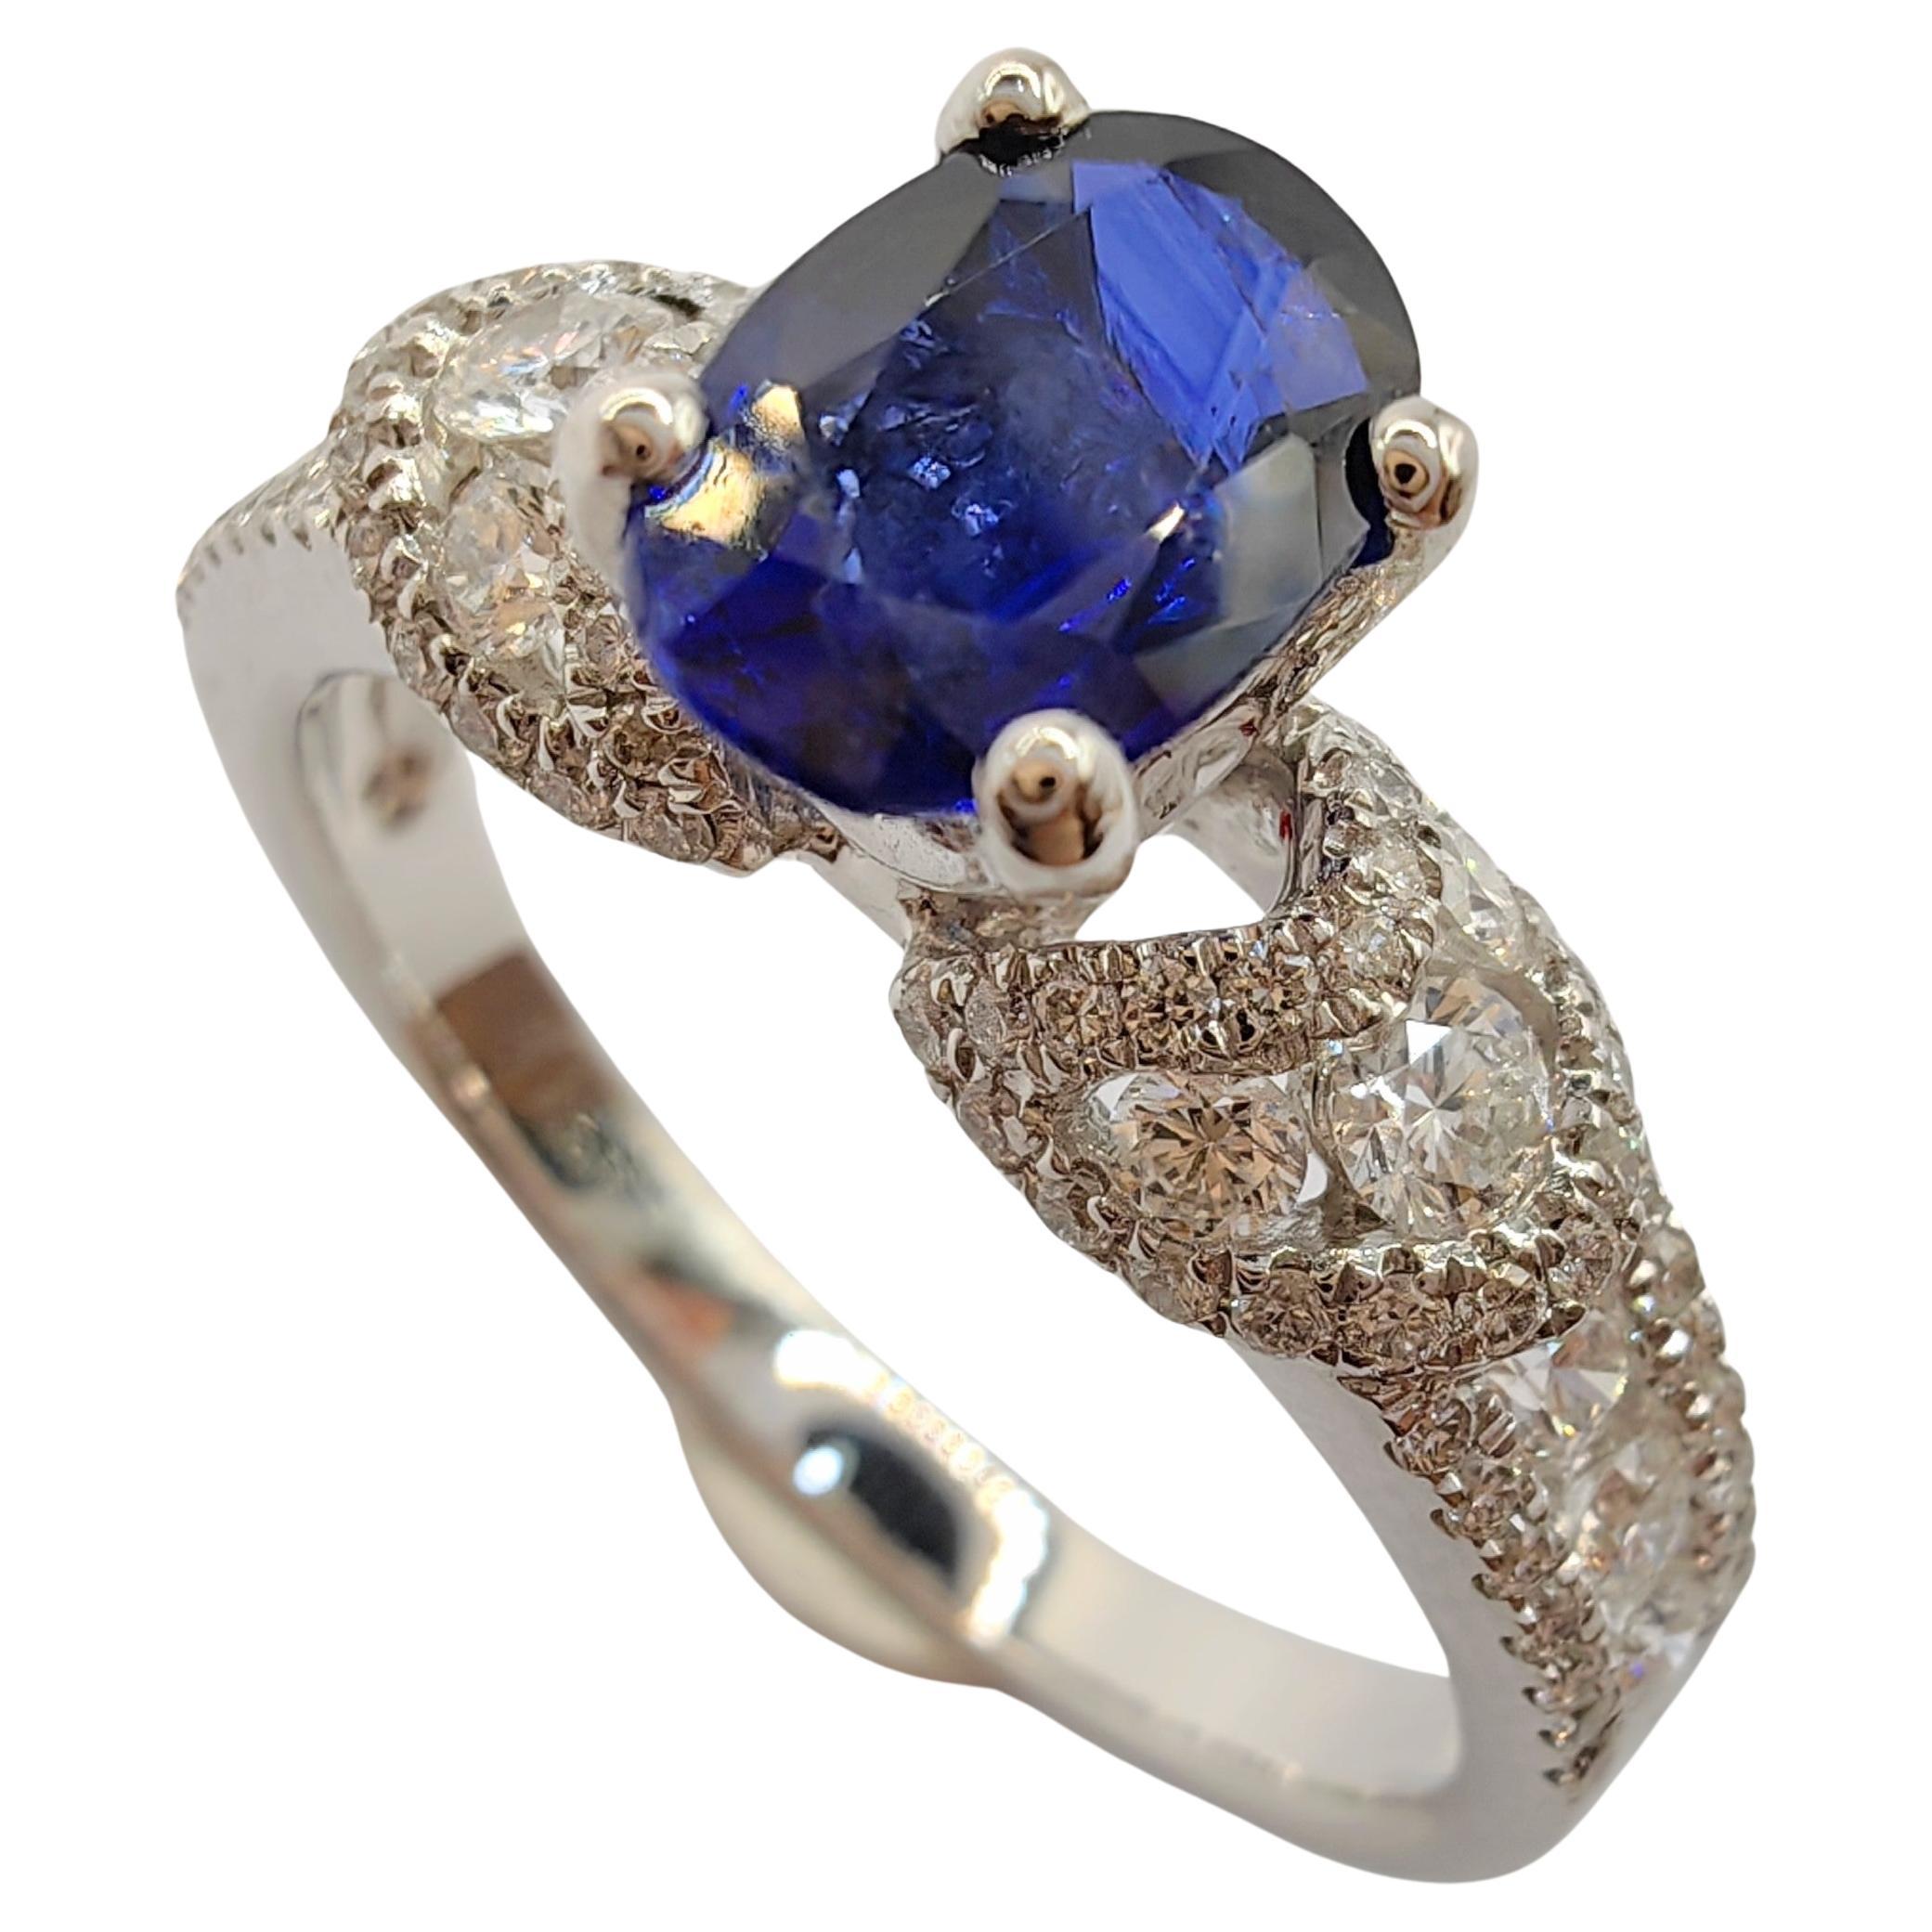 .88 Carat Oval-Cut Sapphire 88 Diamond Cluster Ring in 18k White Gold